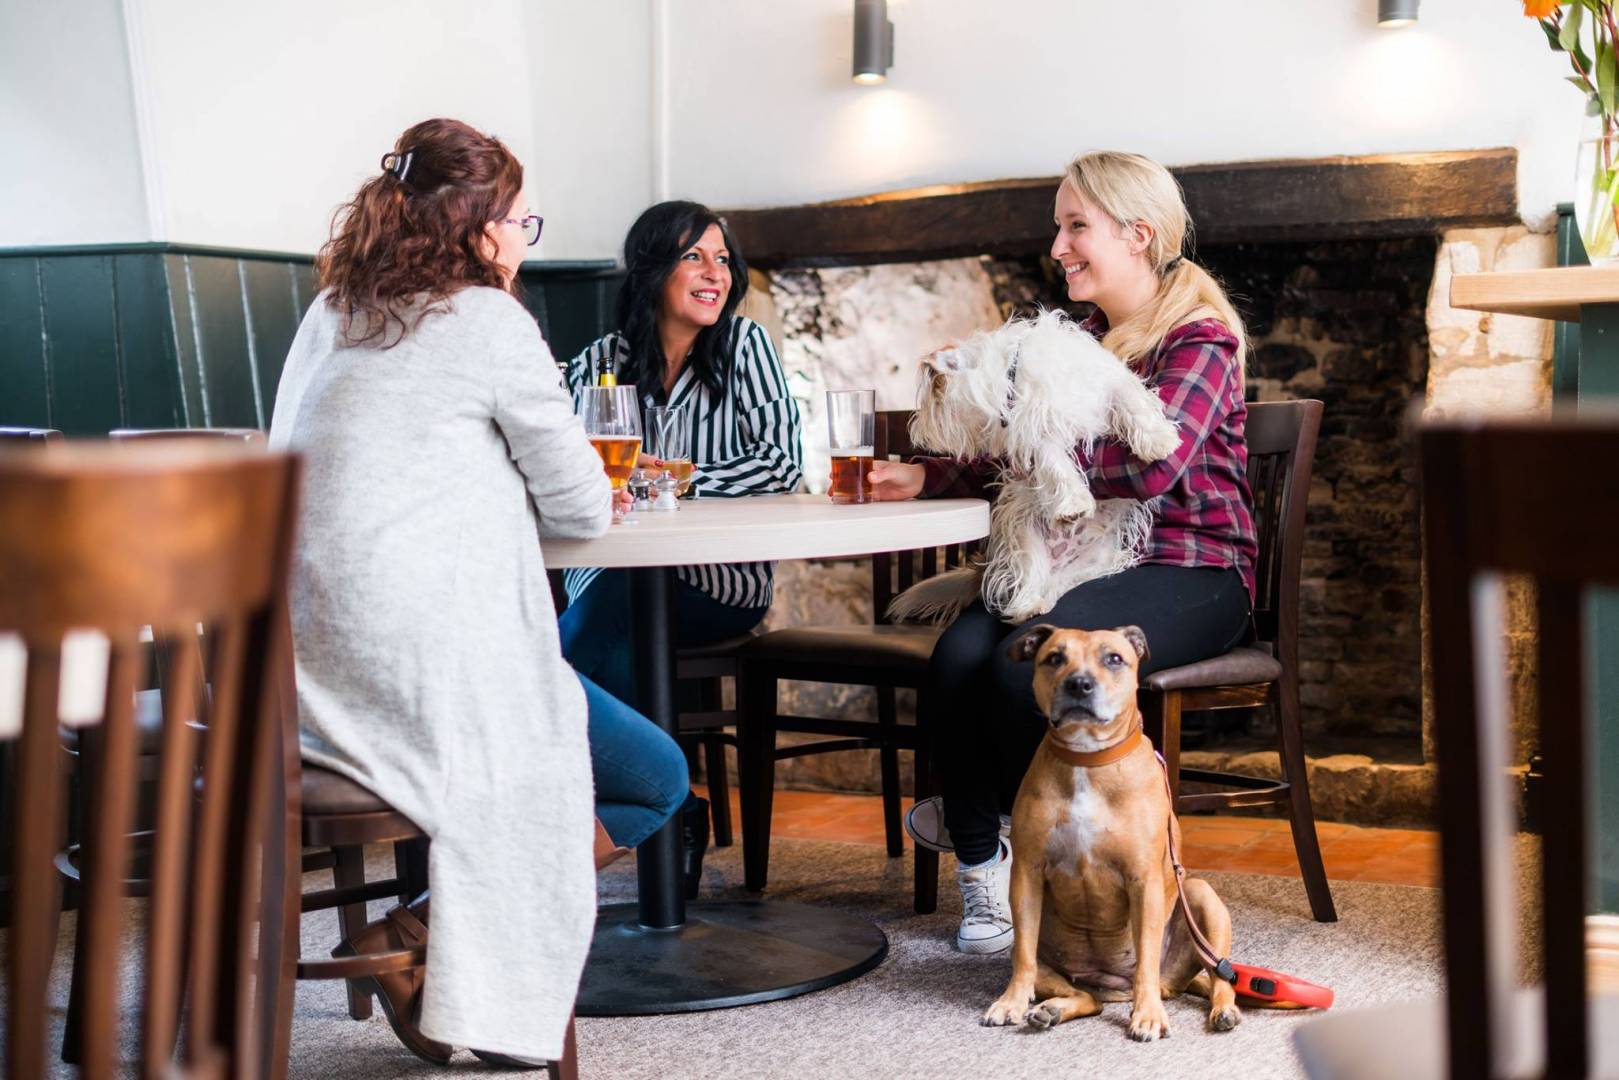 Three women at a pub table with two dogs